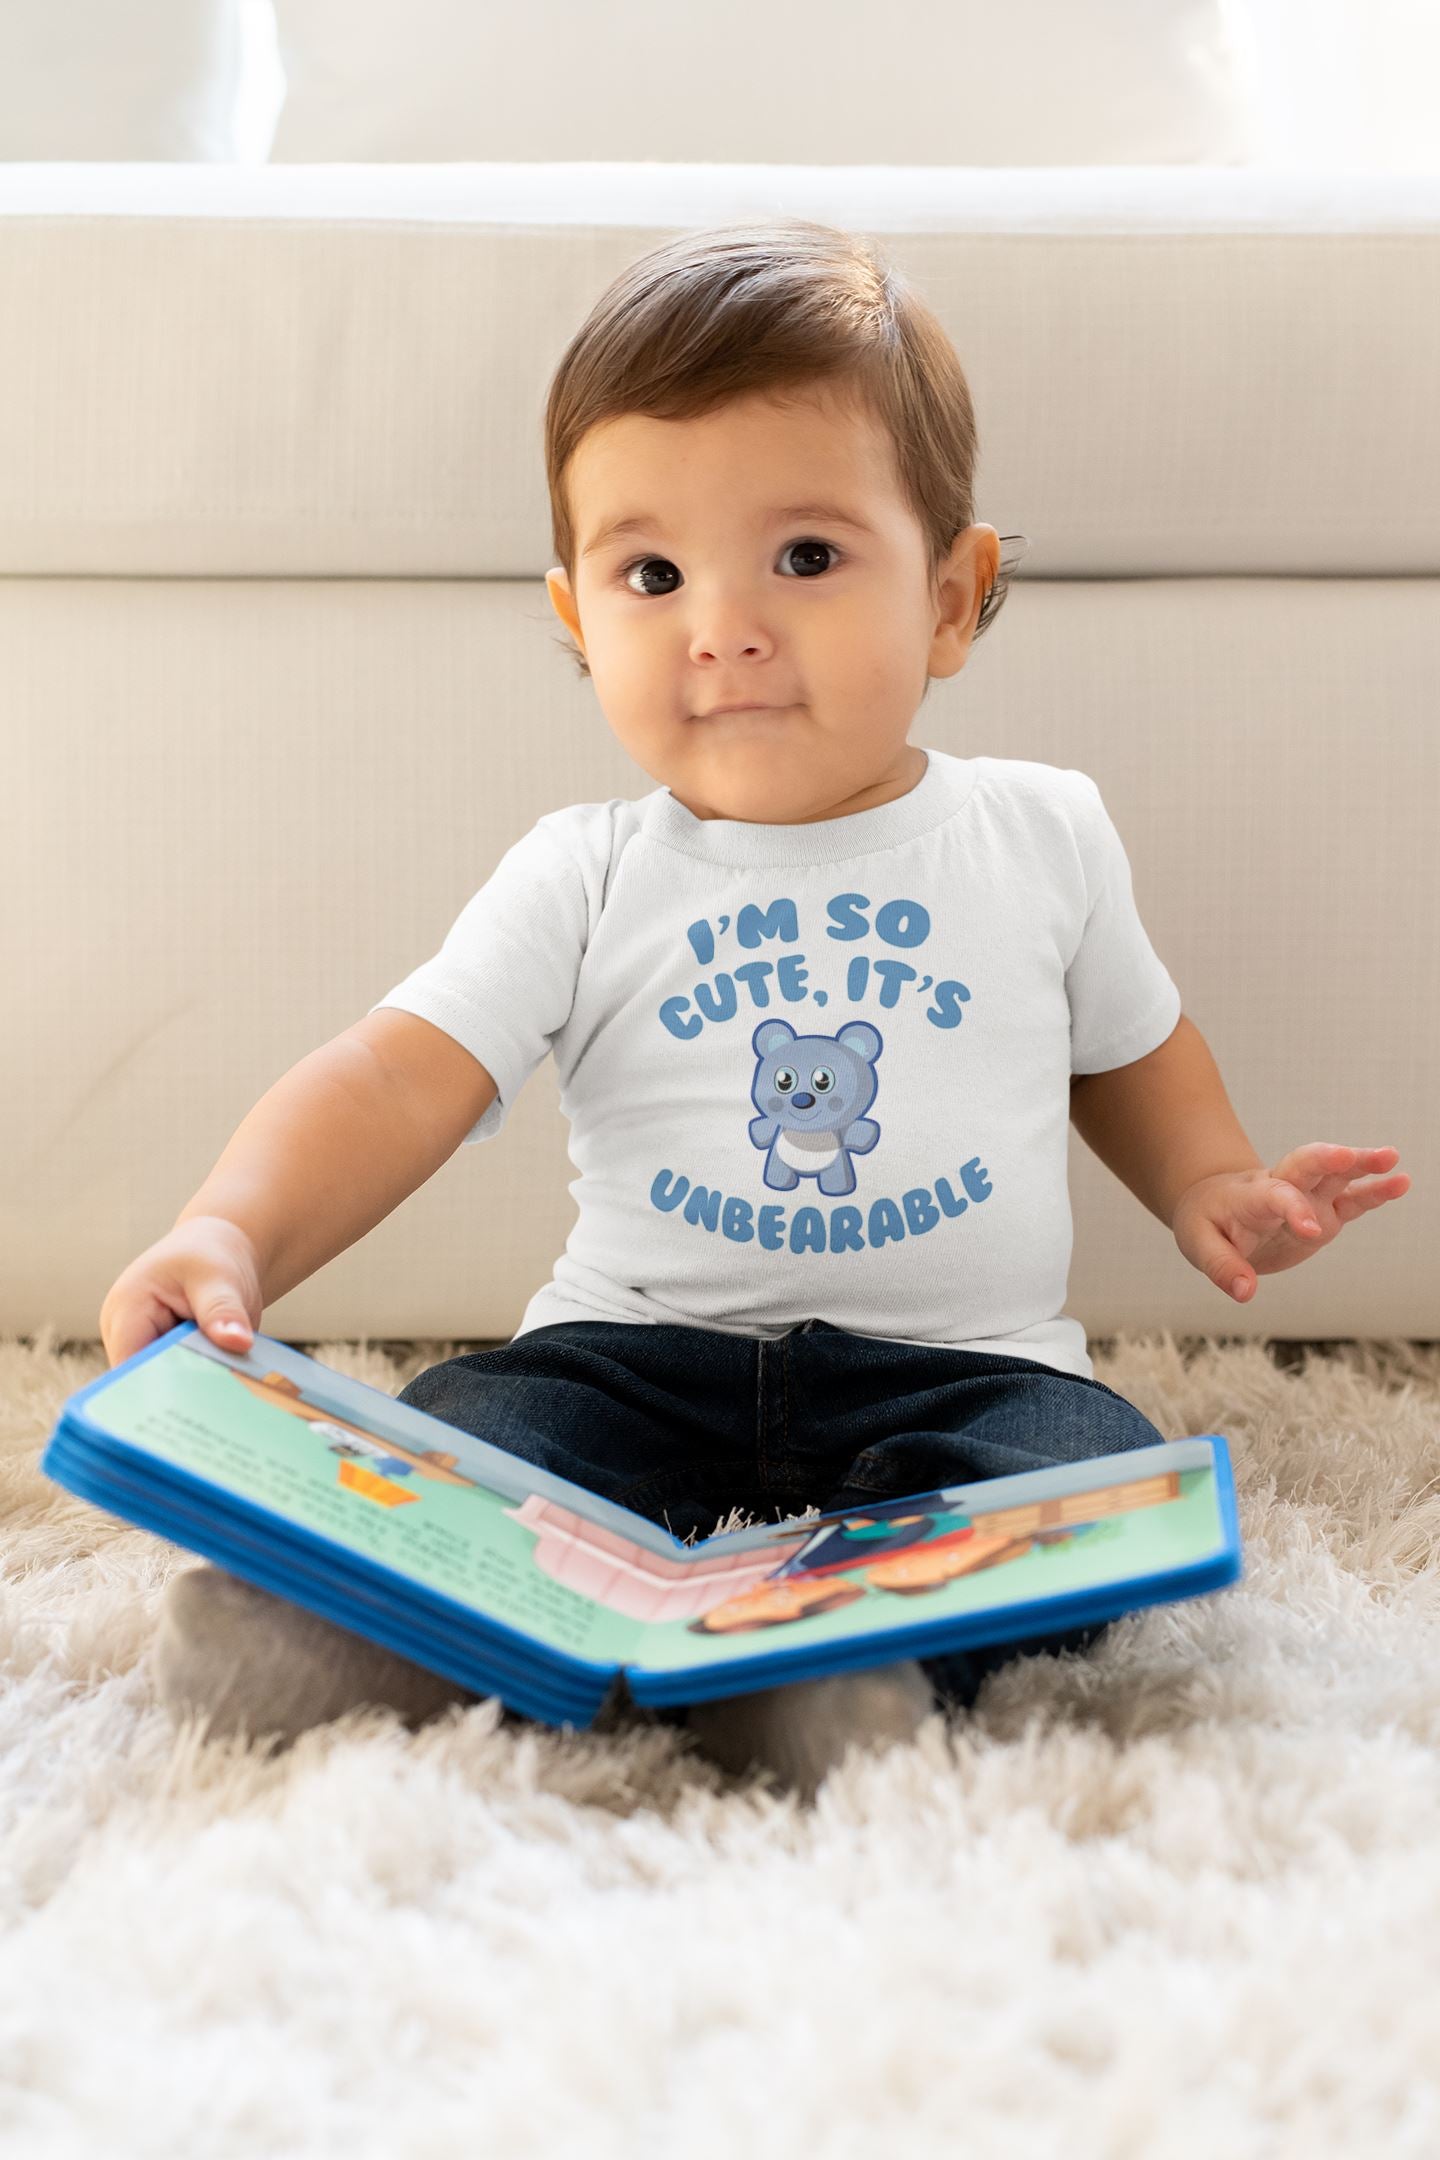 I am So Cute its Unbearable Special White T Shirt for Babies freeshipping - Catch My Drift India